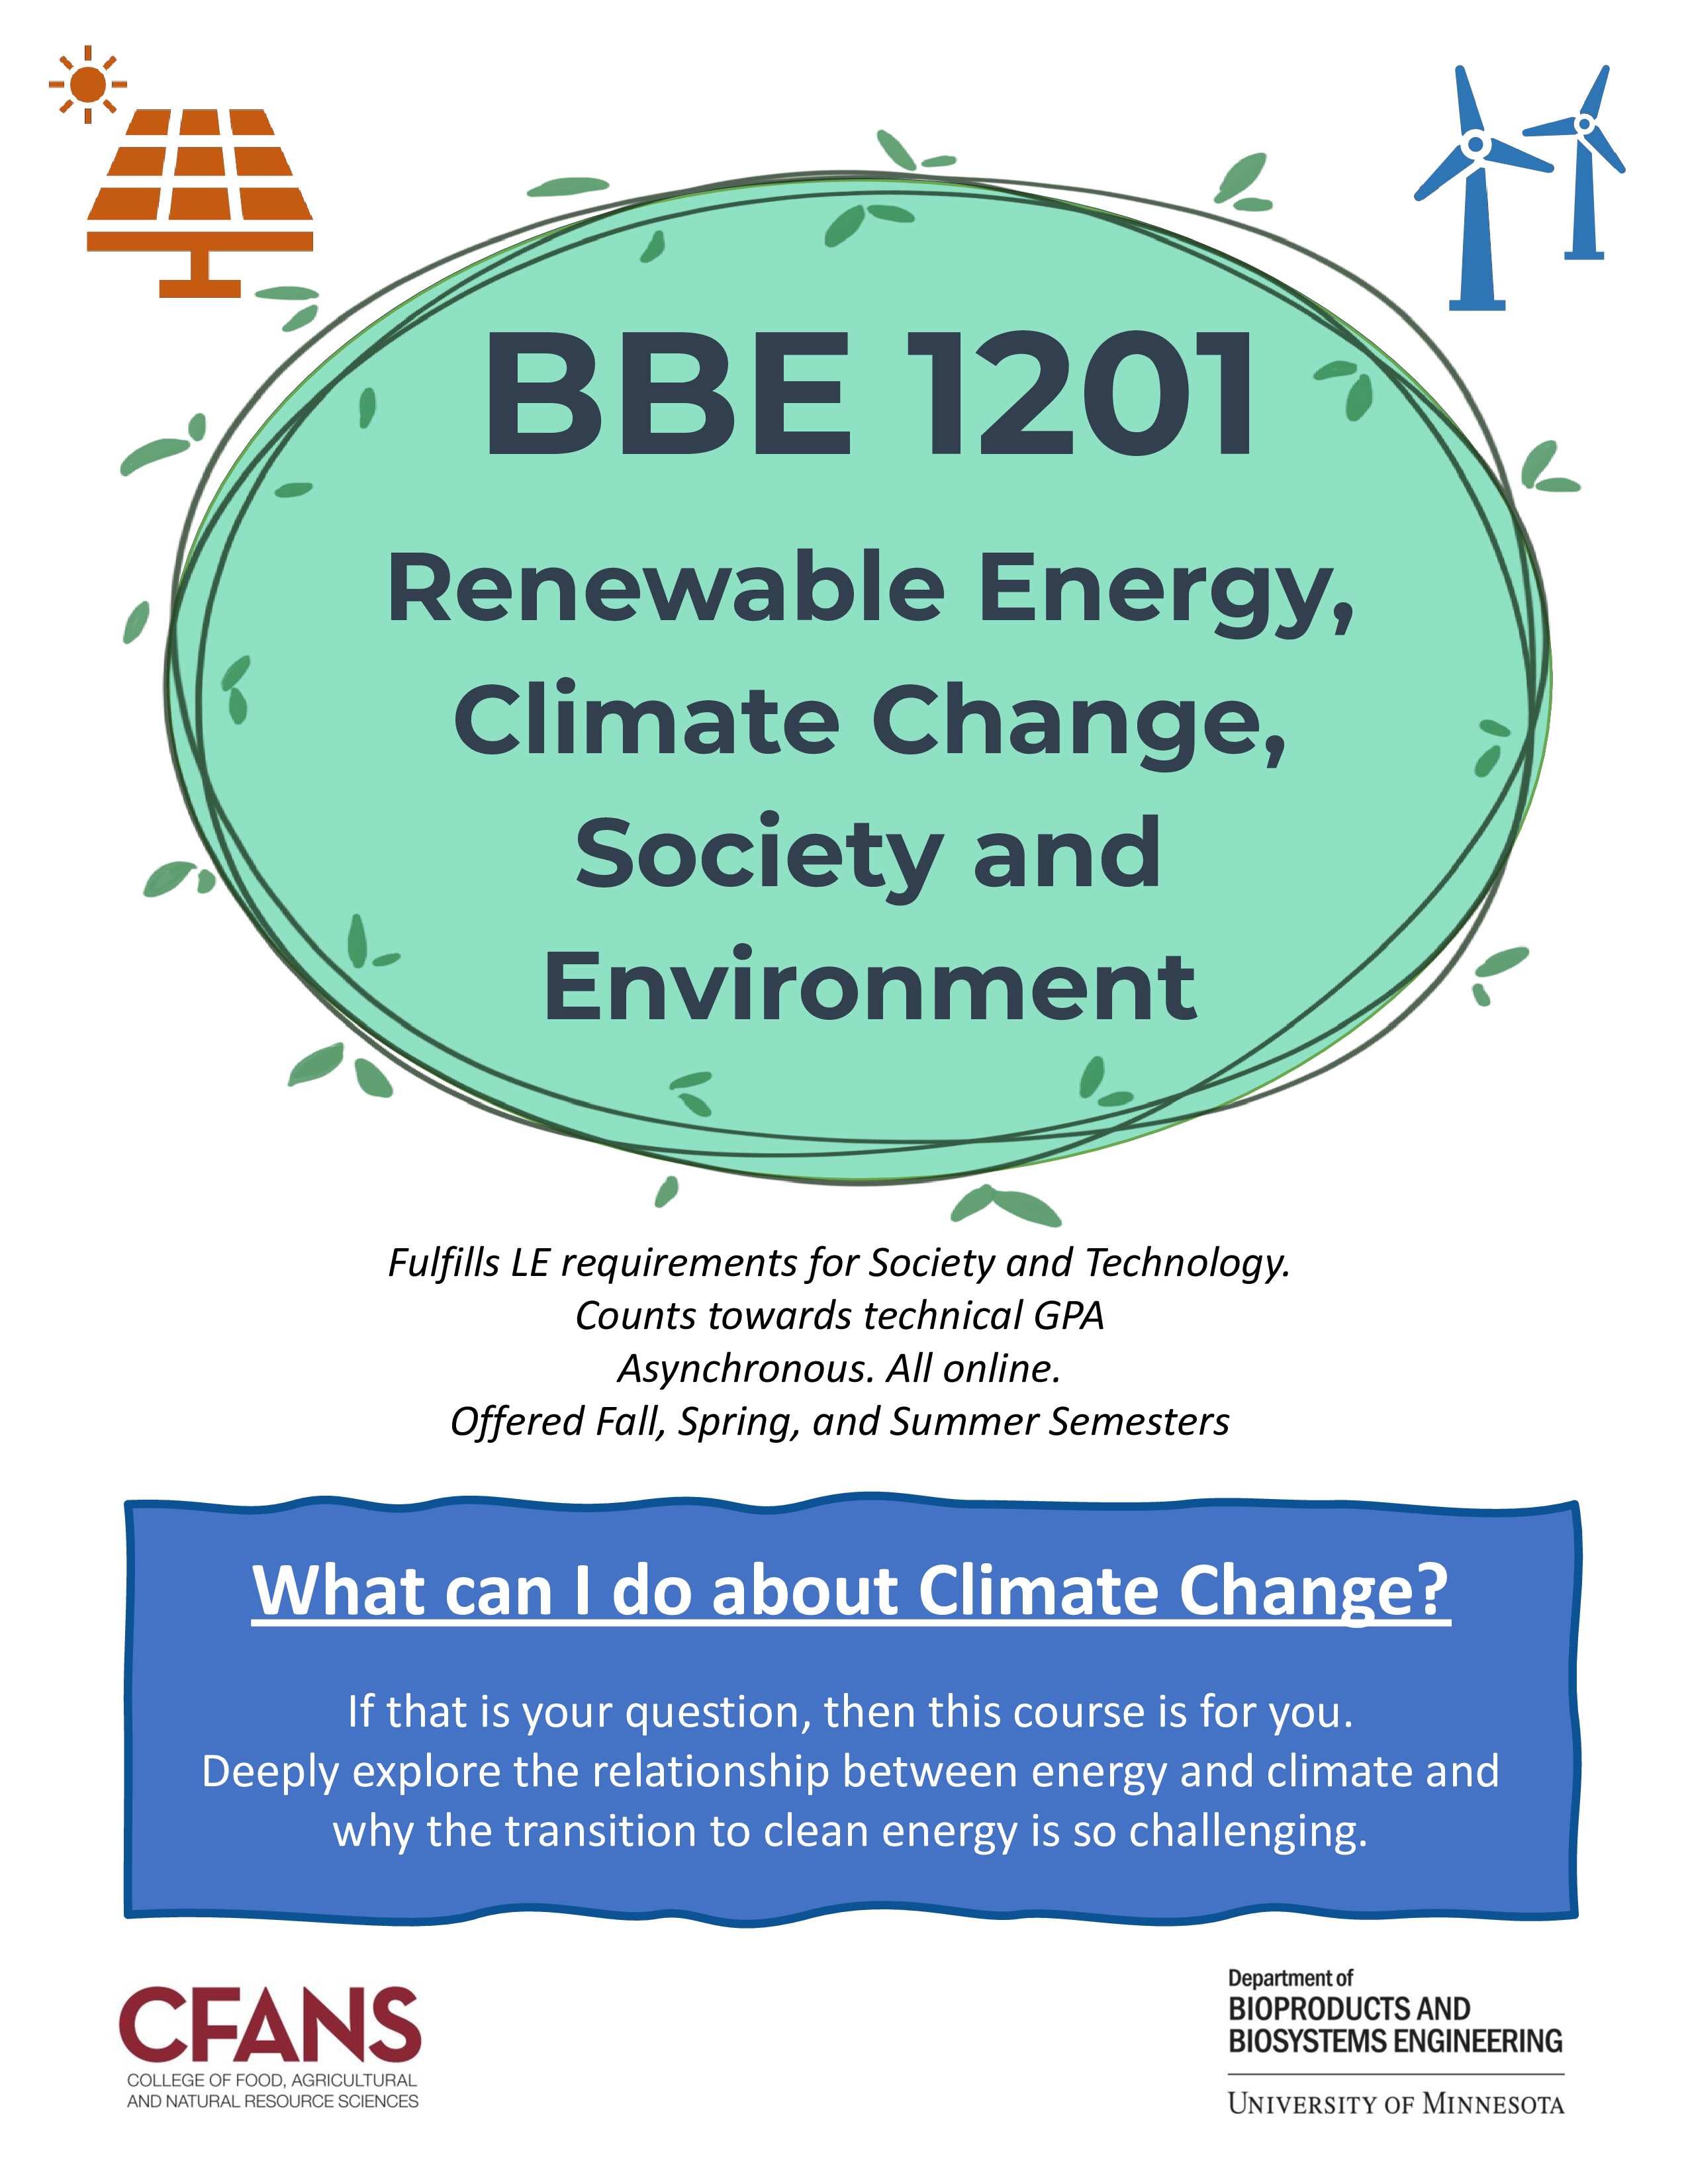 BBE1202: Renewable Energy, Climate Change, Society and Environment